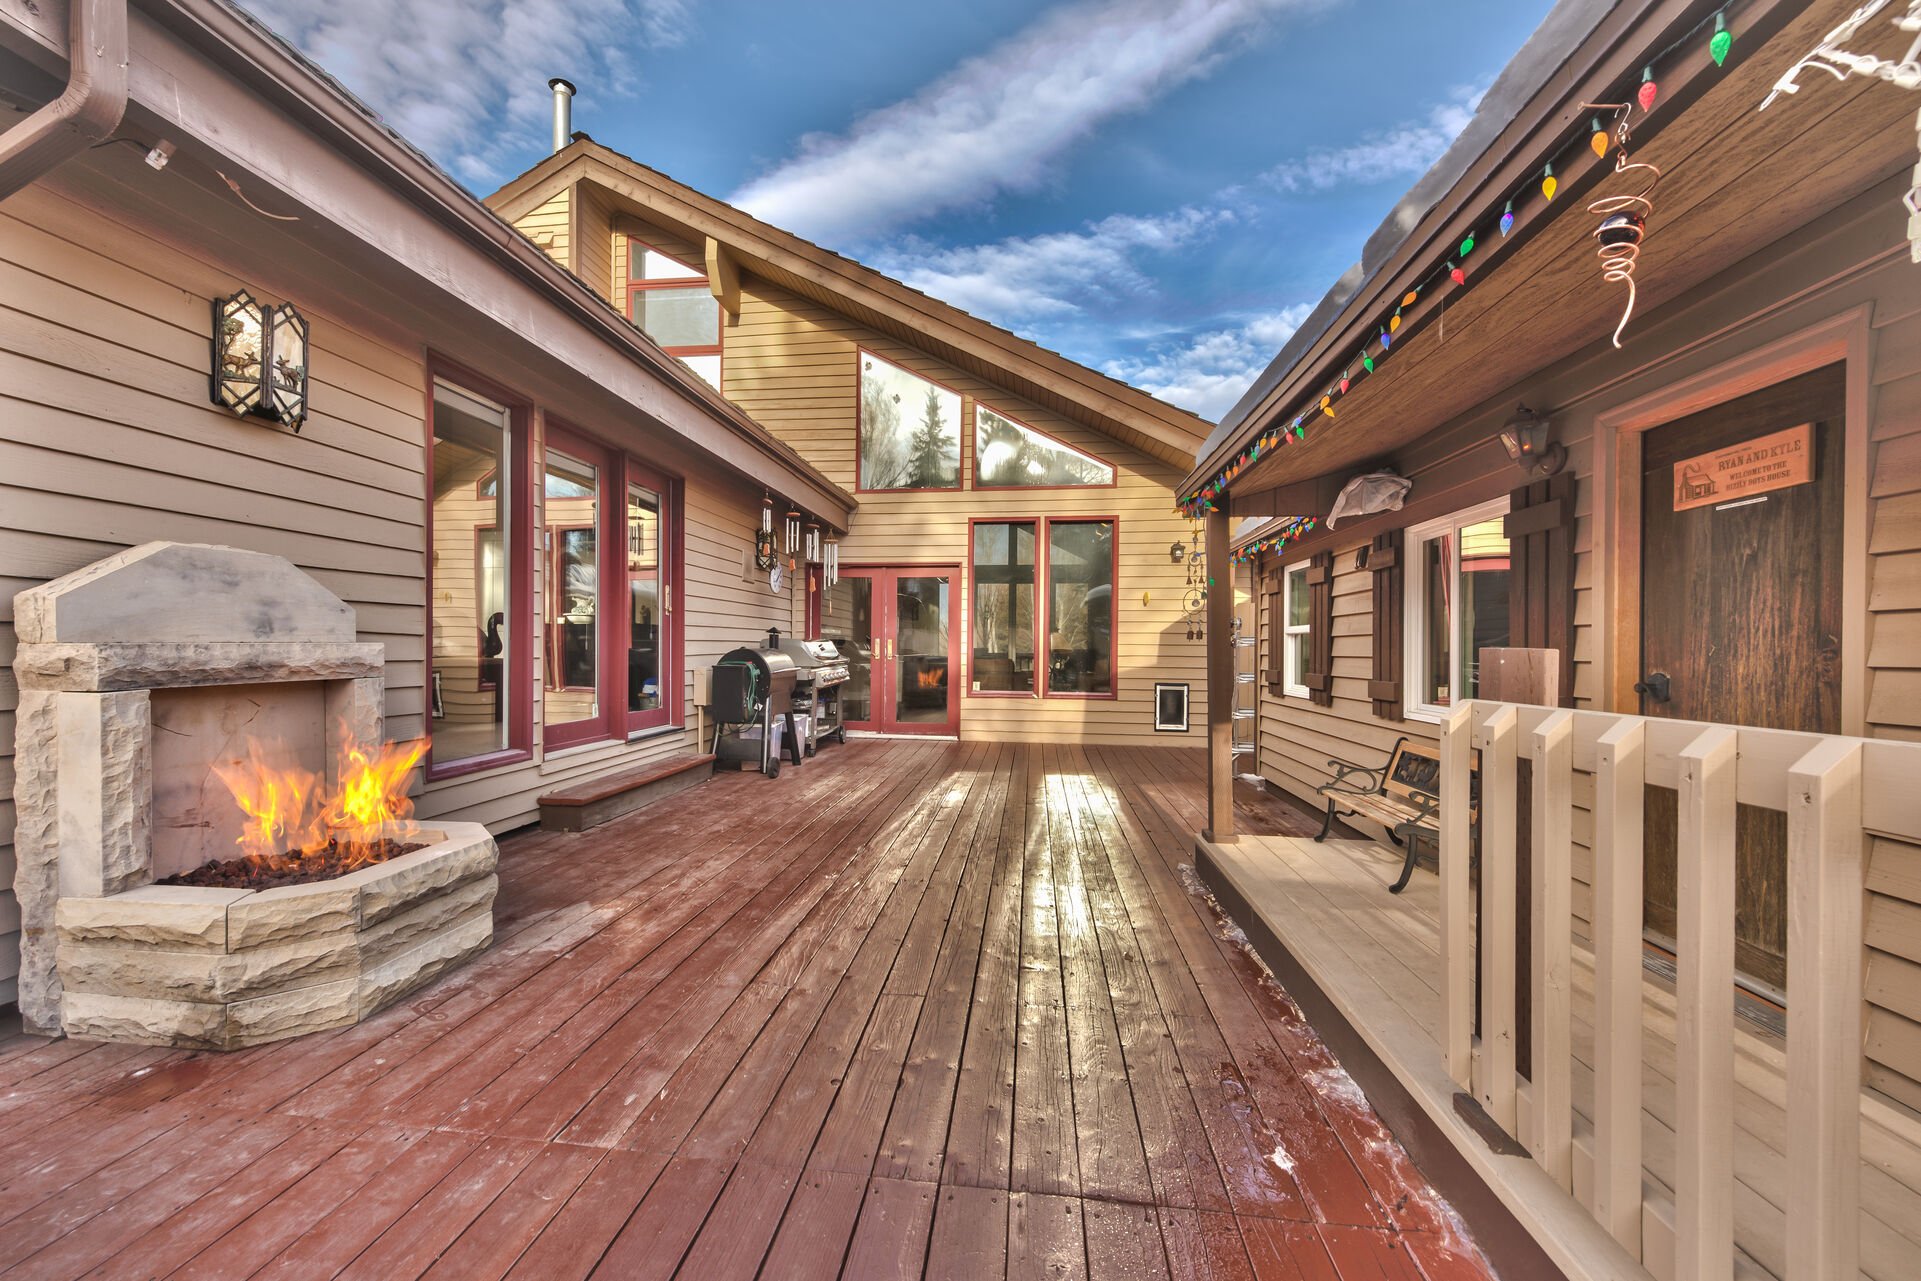 Spacious private deck with two stainless steel BBQ grills, hot tub and kids playhouse, and gas fireplace